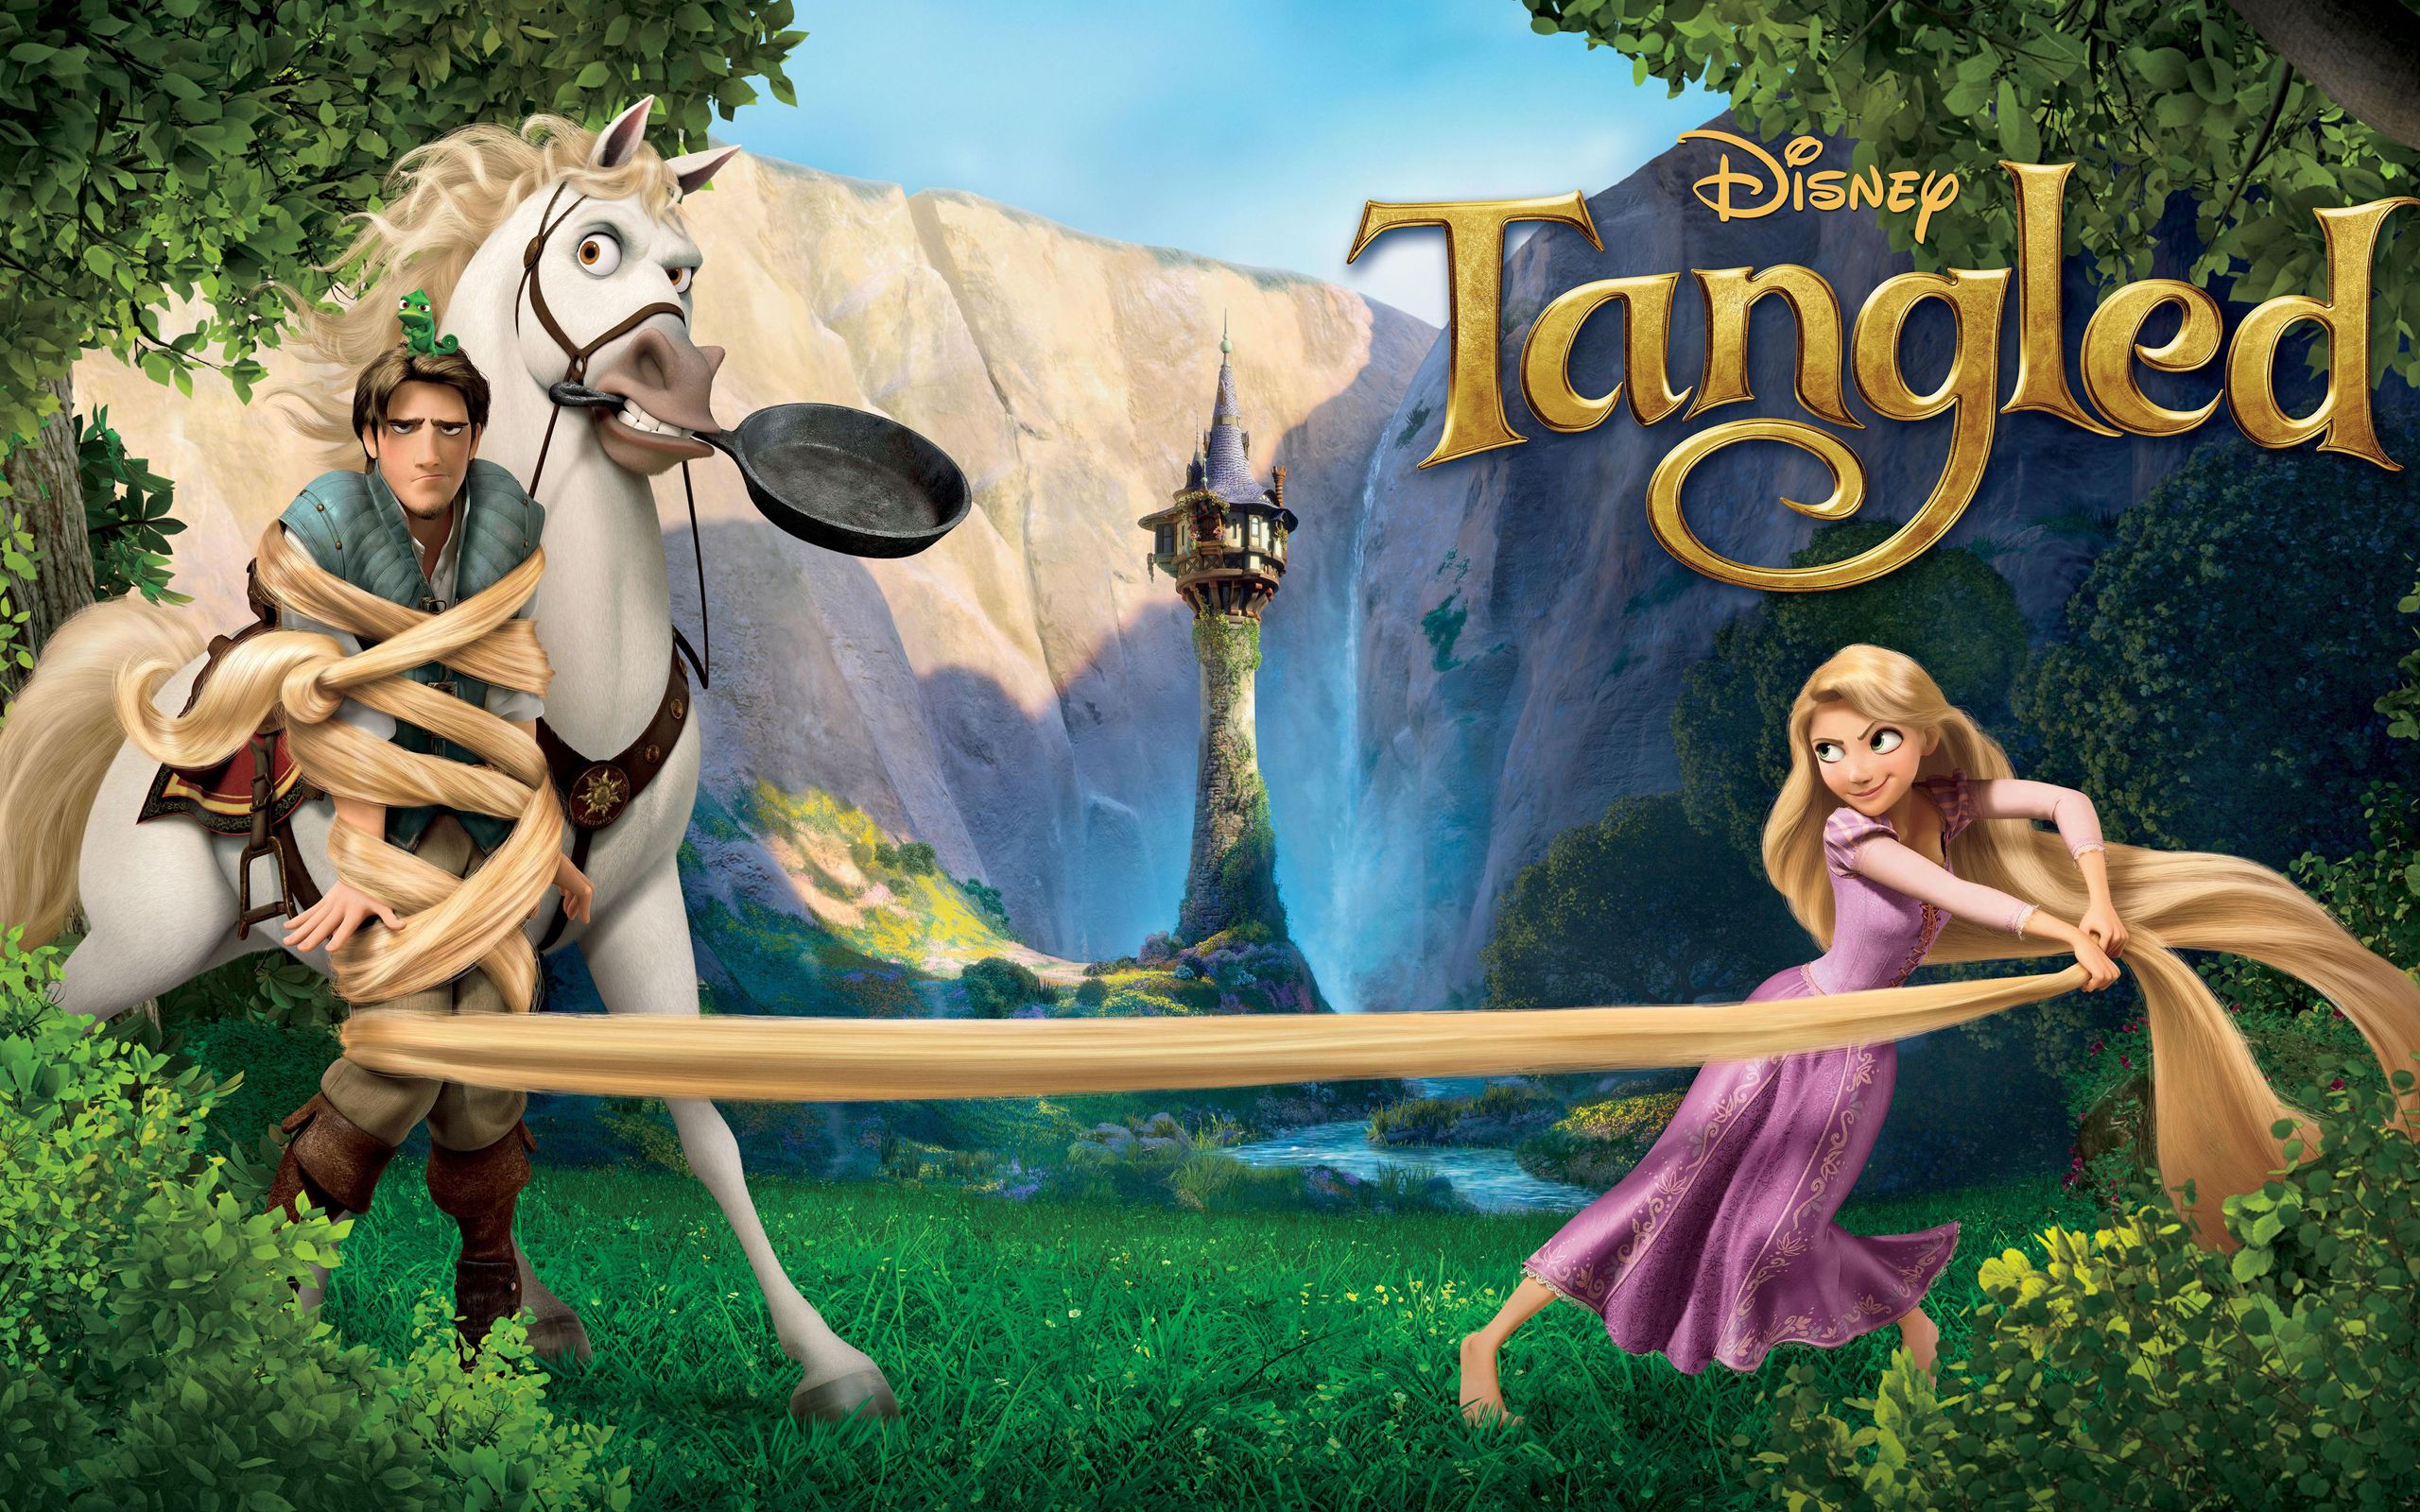 Tangled 4K wallpaper for your desktop or mobile screen free and easy to download